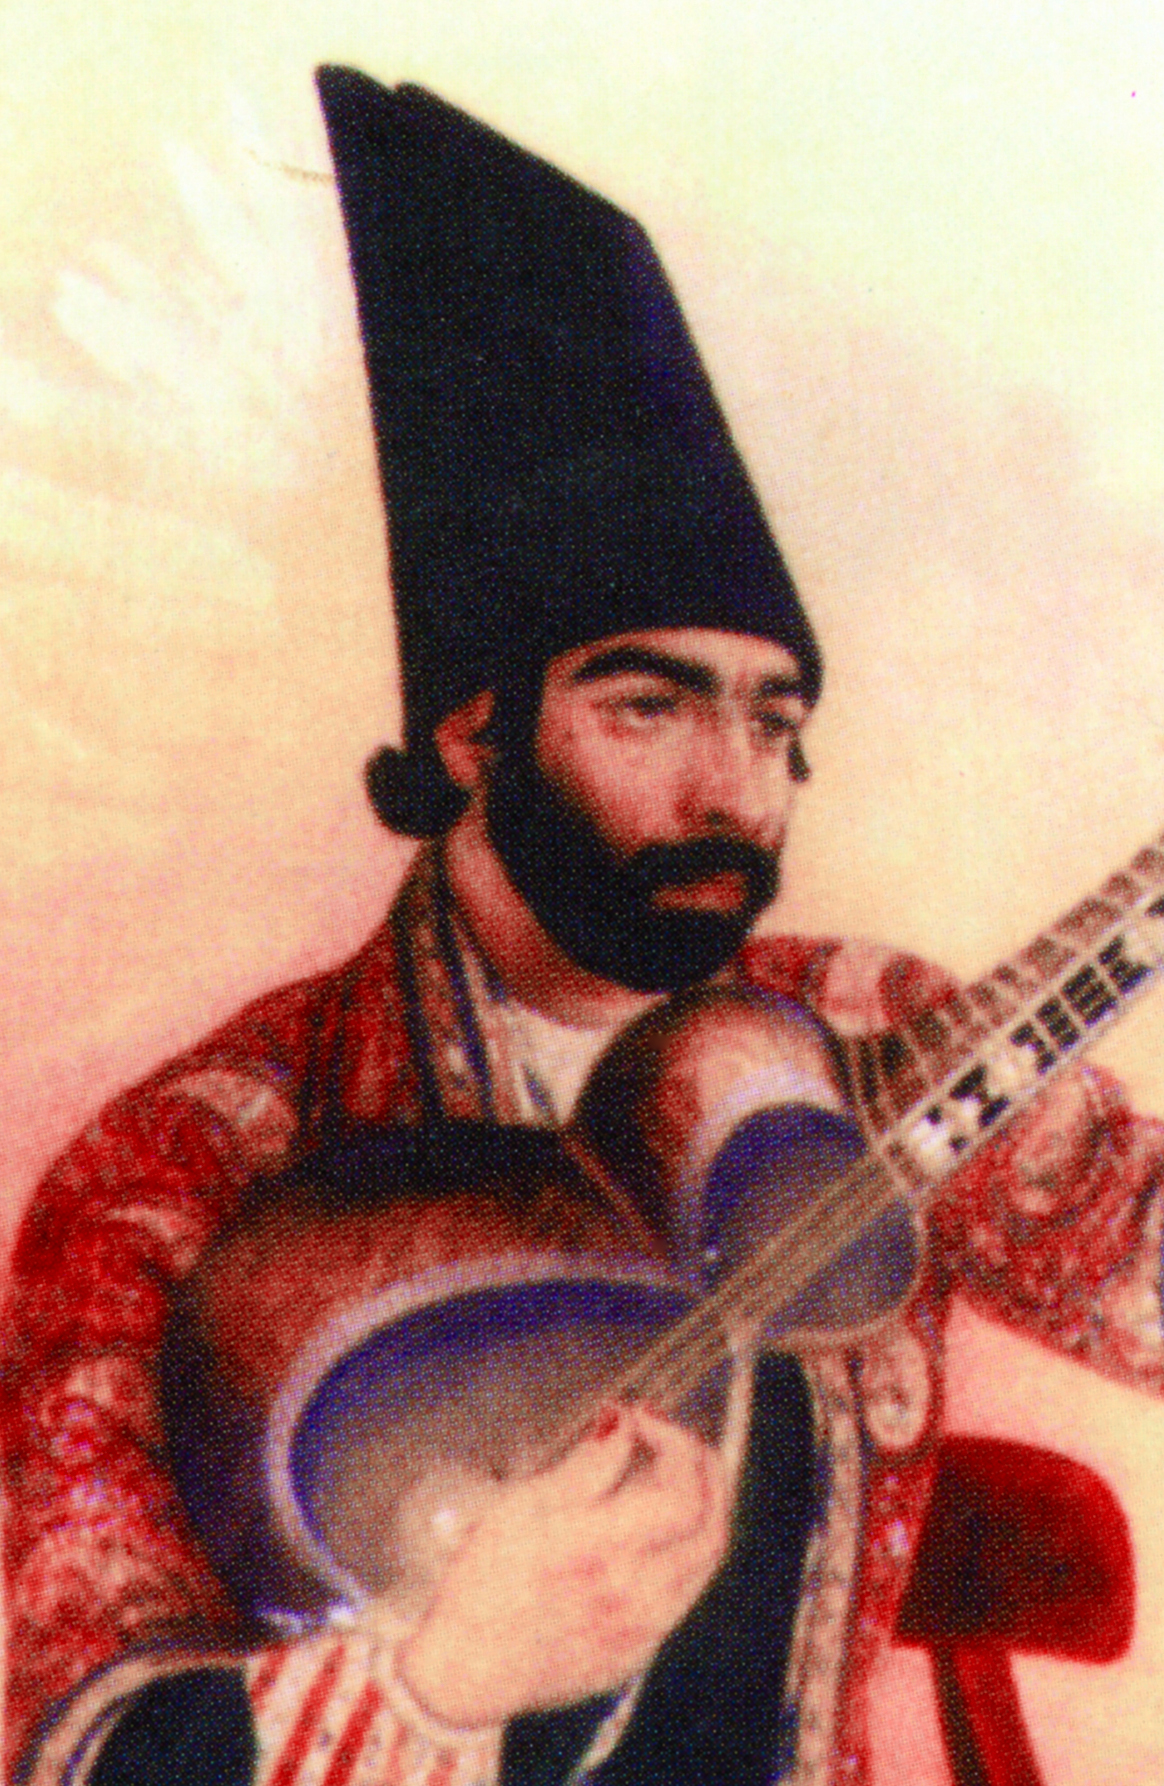 A painting of a man in traditional turkish clothing holding a guitar.